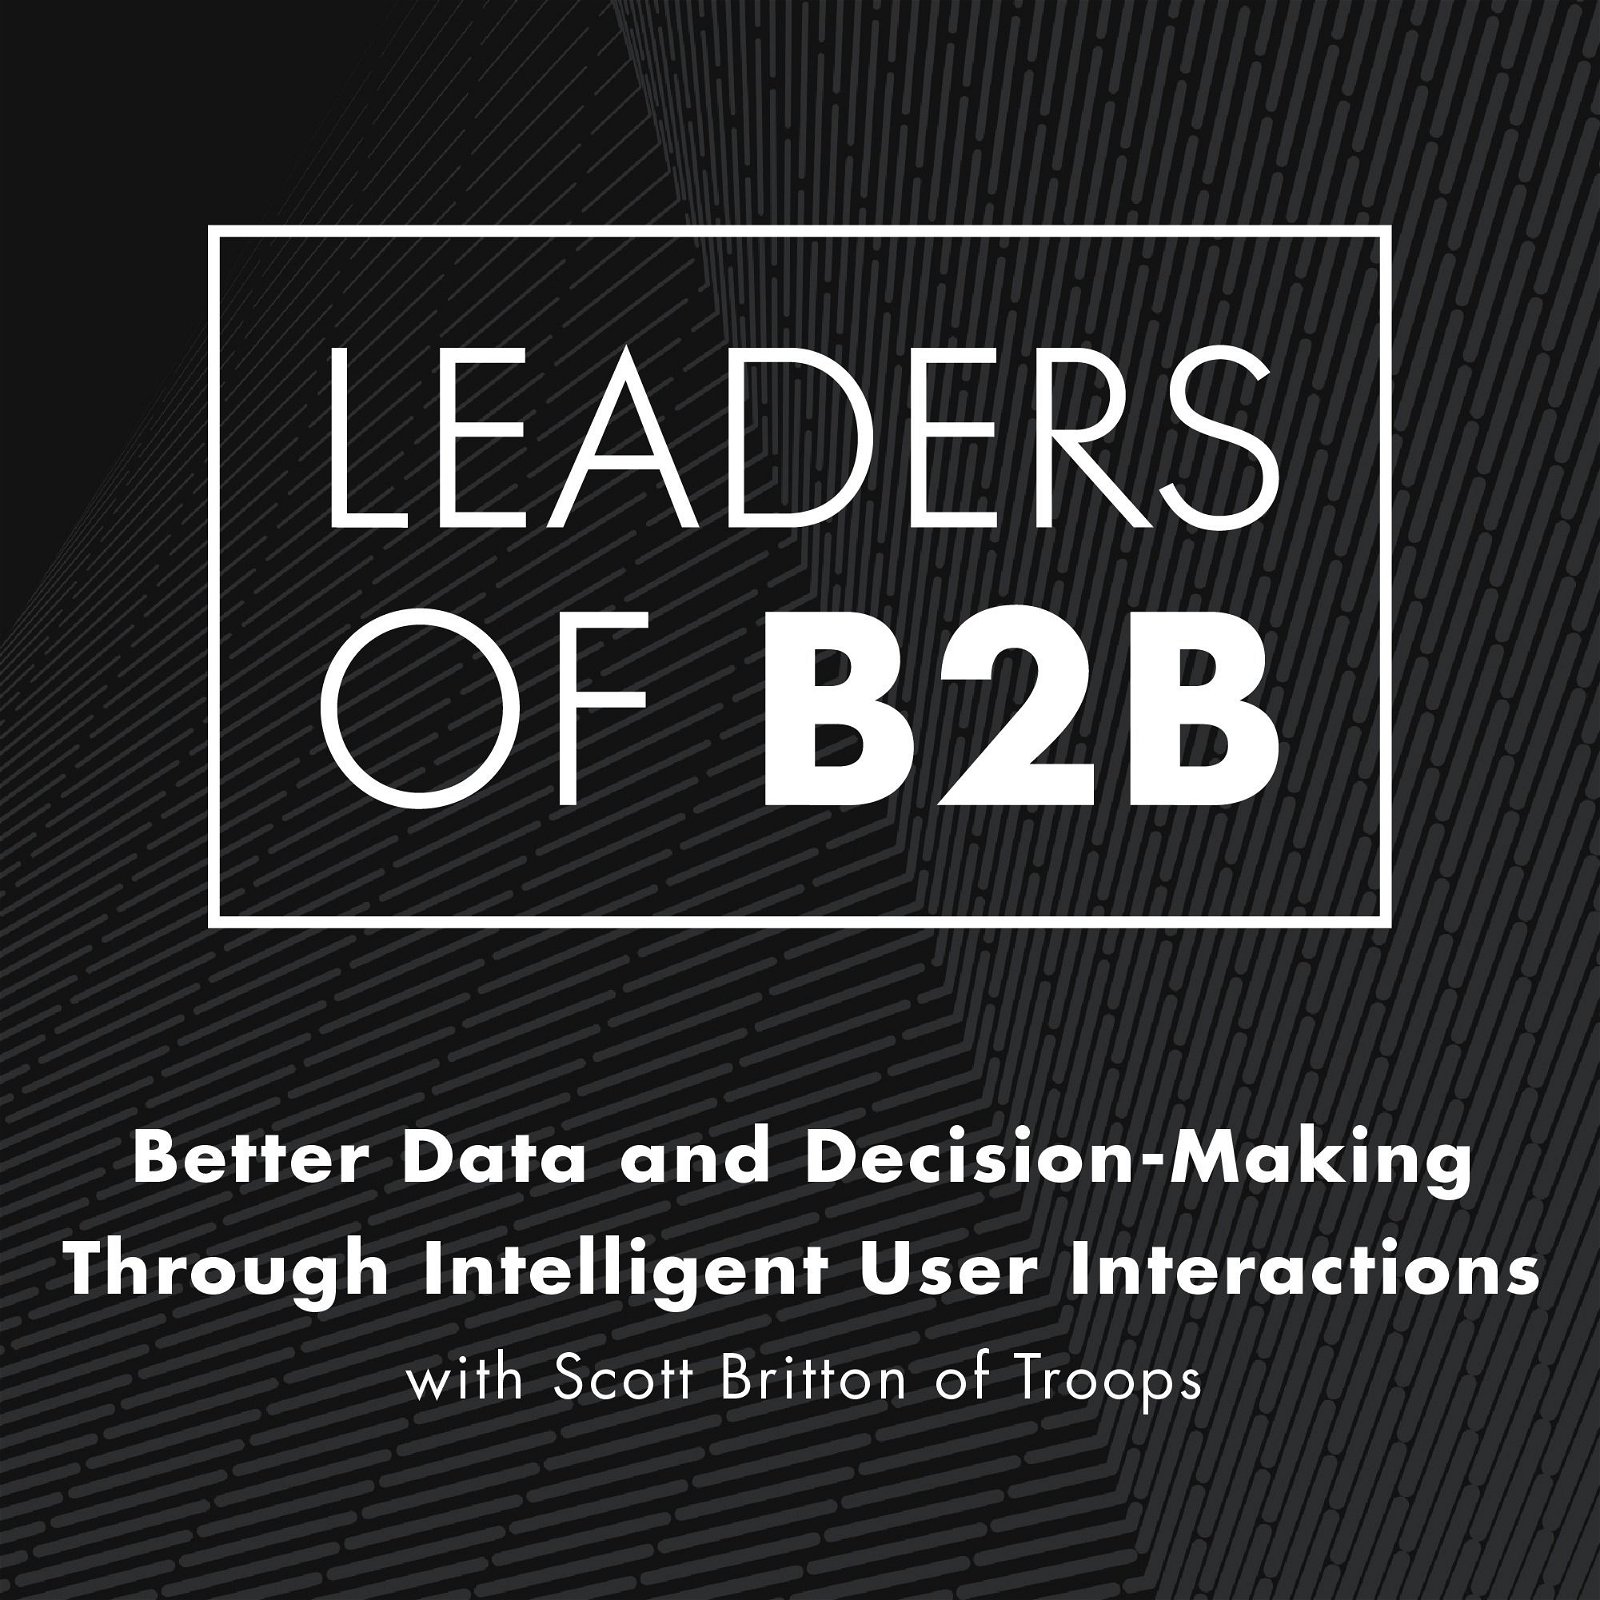 Improving Data and Decision-Making Using Intelligent User Interactions with Scott Britton of Troops